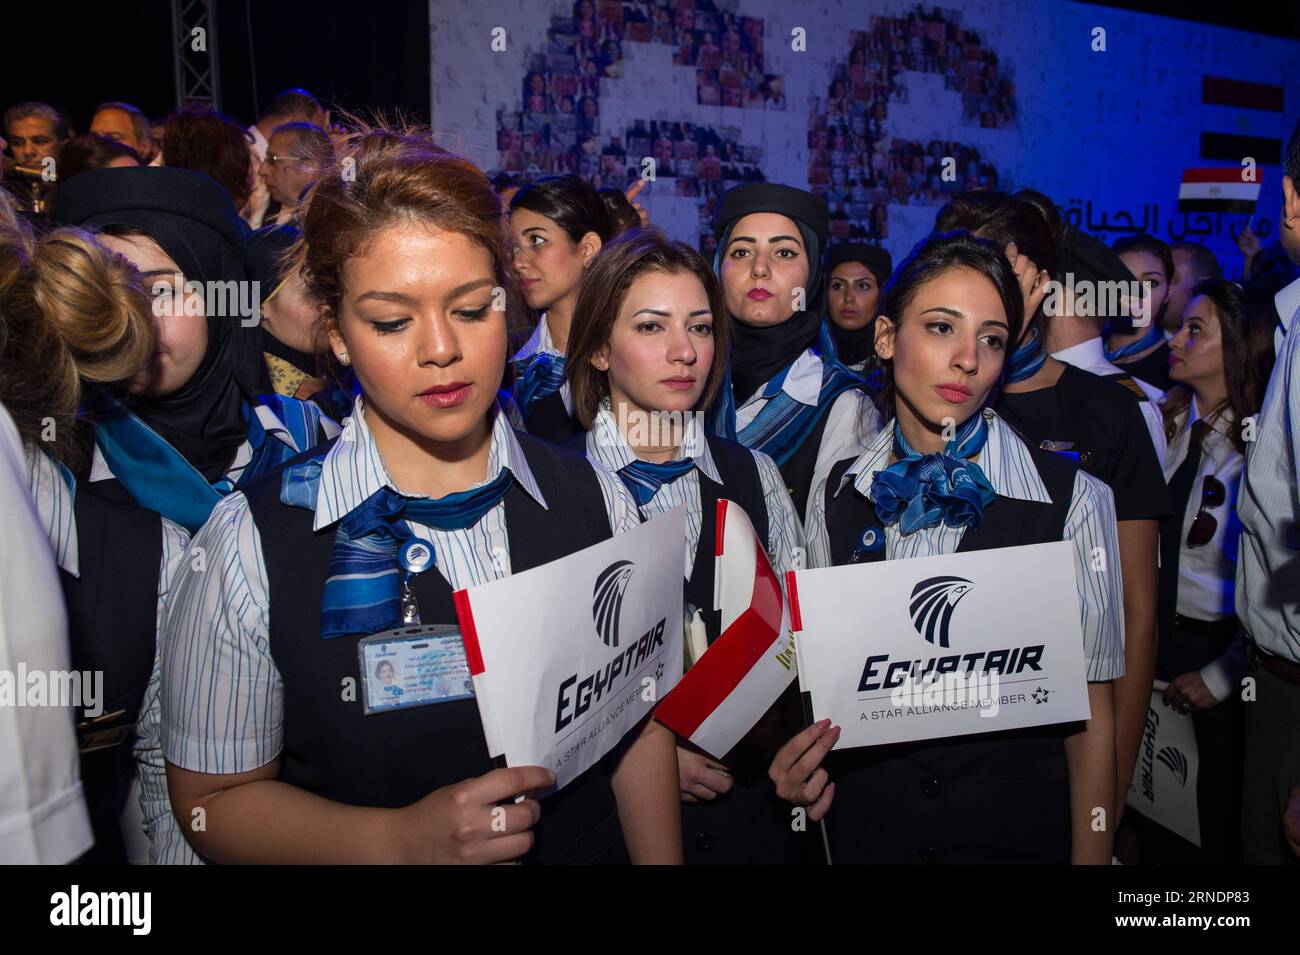 EgyptAir-Maschine abgestürzt: Trauermarsch in Kairo (160526) -- CAIRO, May 26, 2016 -- Staff members from EgyptAir hold flags while participating in a candlelight march mourning the victims of crashed EgyptAir Flight MS804 plane in Cairo, Egypt, May 26, 2016. A massive candlelight march has been held Thursday evening near the Opera House here in the Egyptian capital city over the recent EgyptAir plane crash with the participation of senior officials including the Egyptian aviation minister and the French ambassador to Cairo. ) EGYPT-CAIRO-CRASHED PLANE-CANDLELIGHT MARCH MengxTao PUBLICATIONxNO Stock Photo